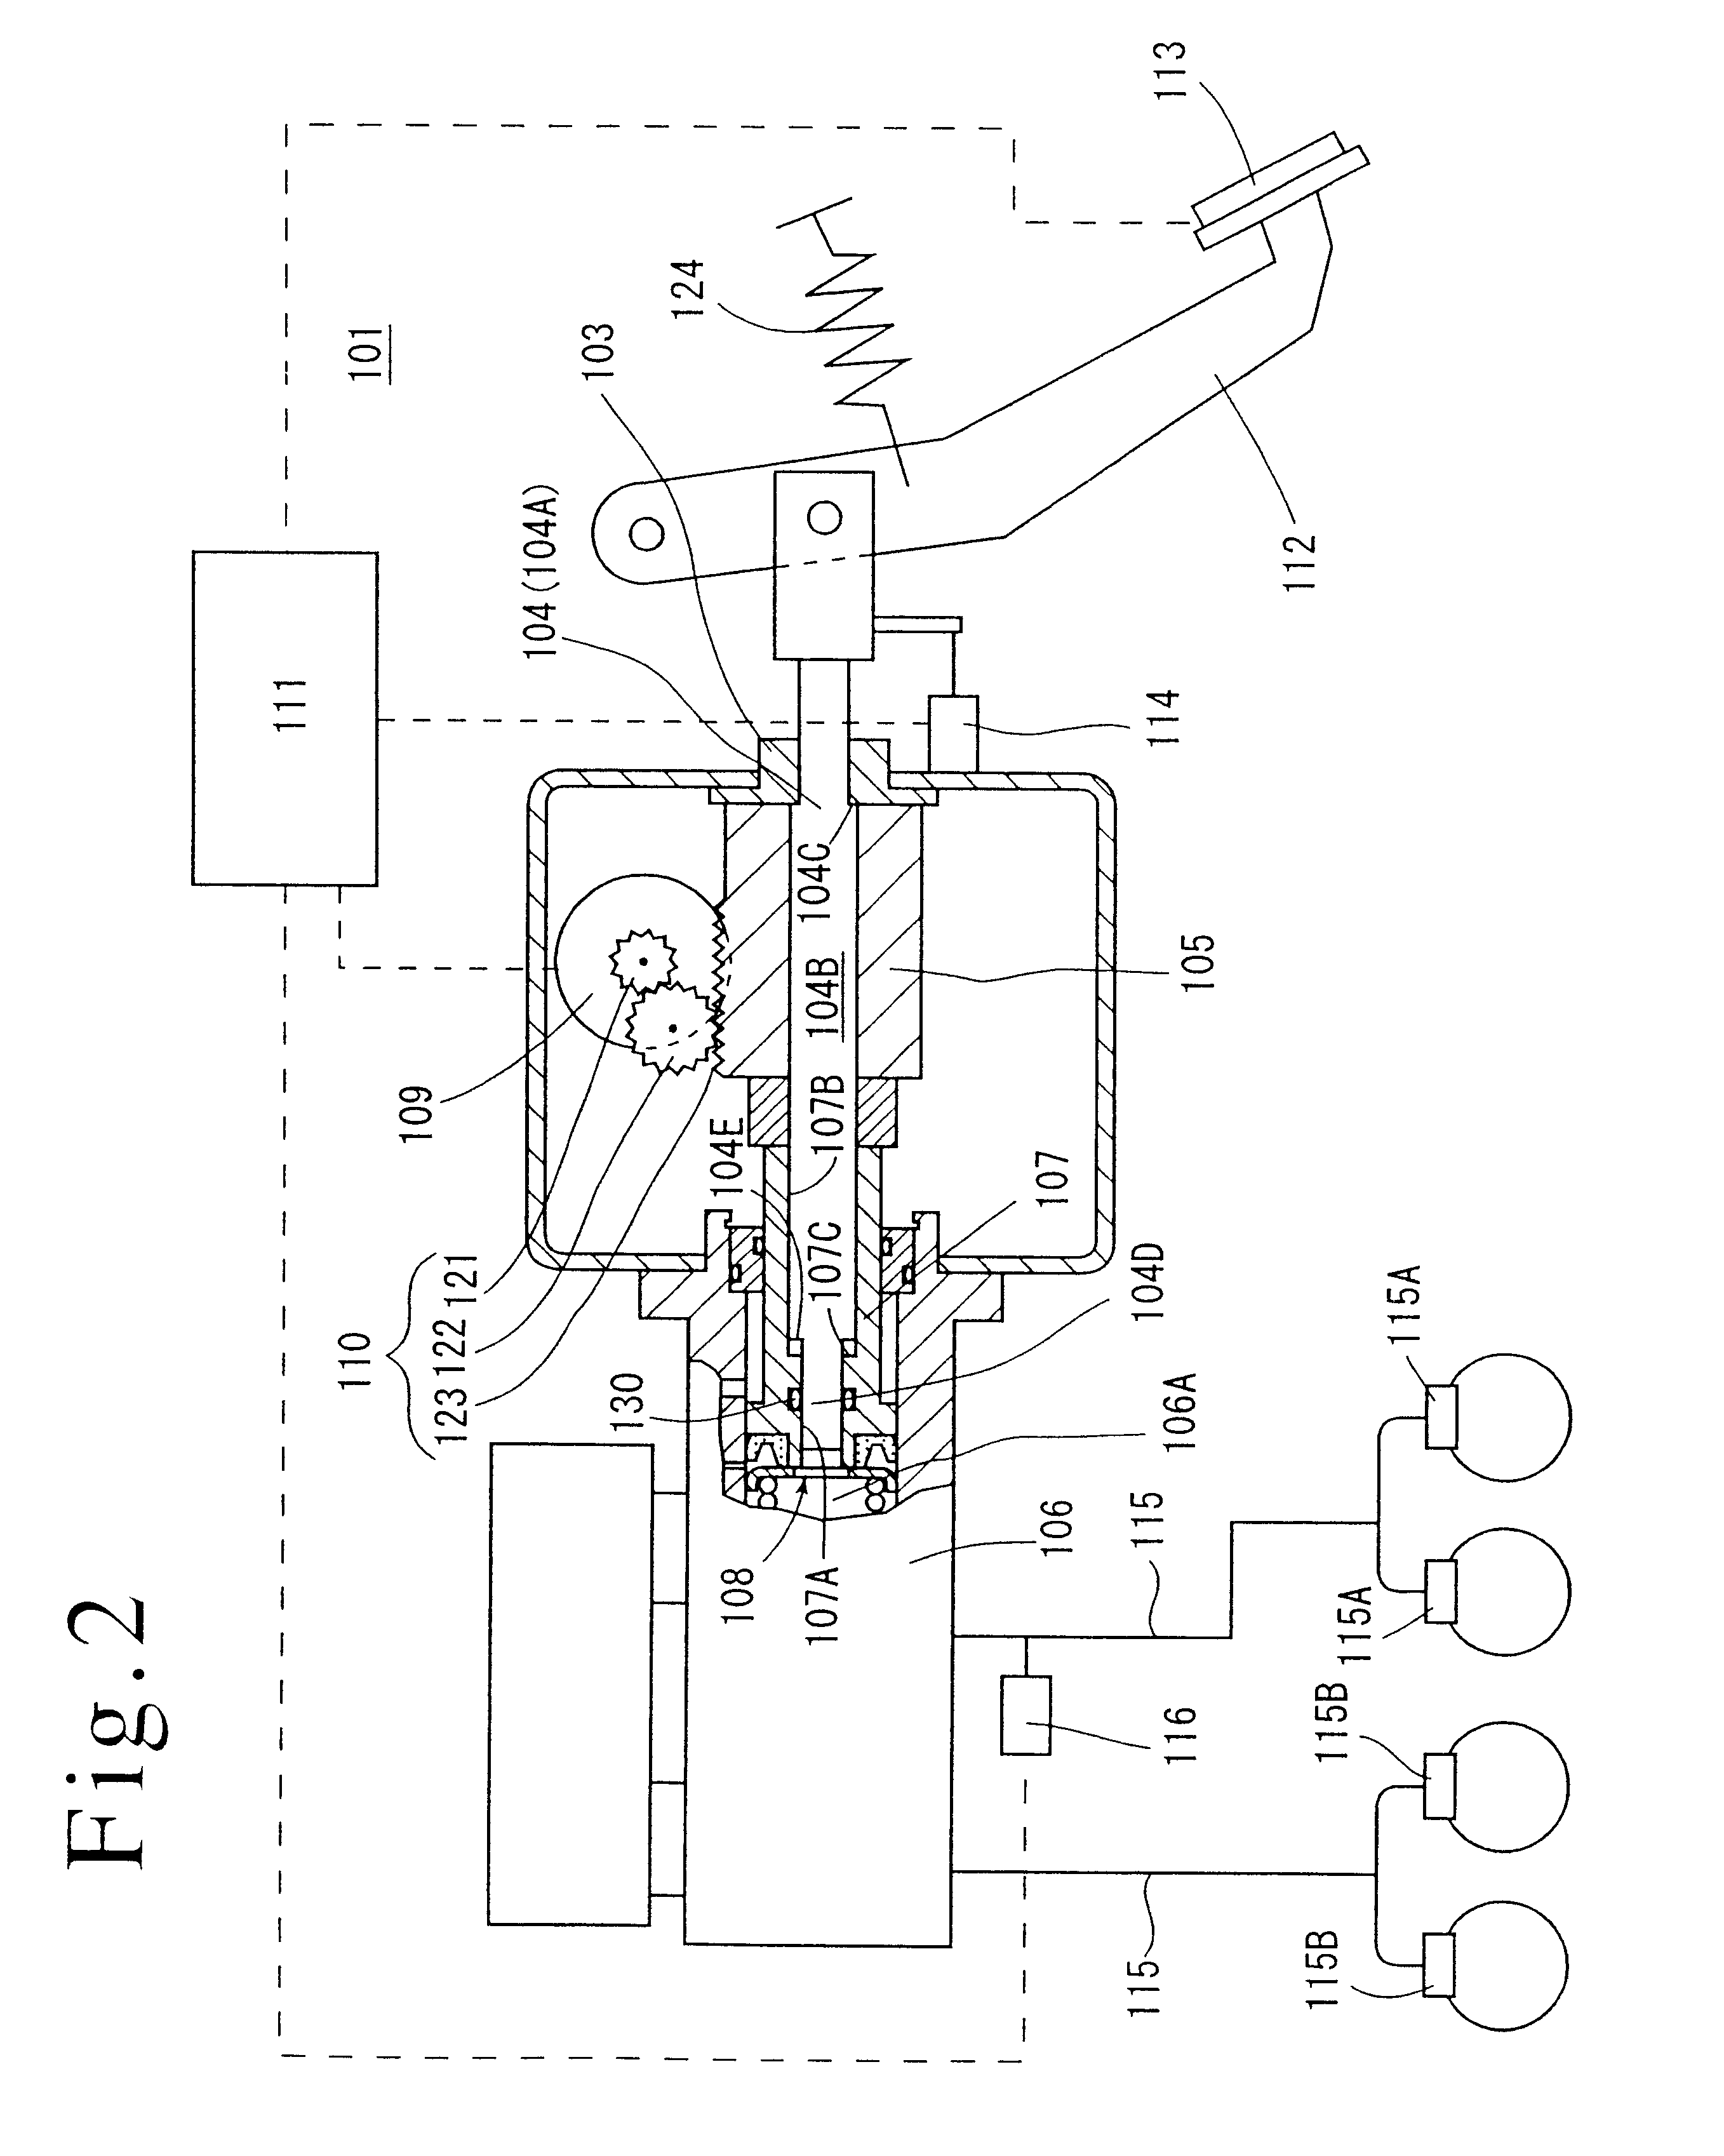 Electrically driven brake booster